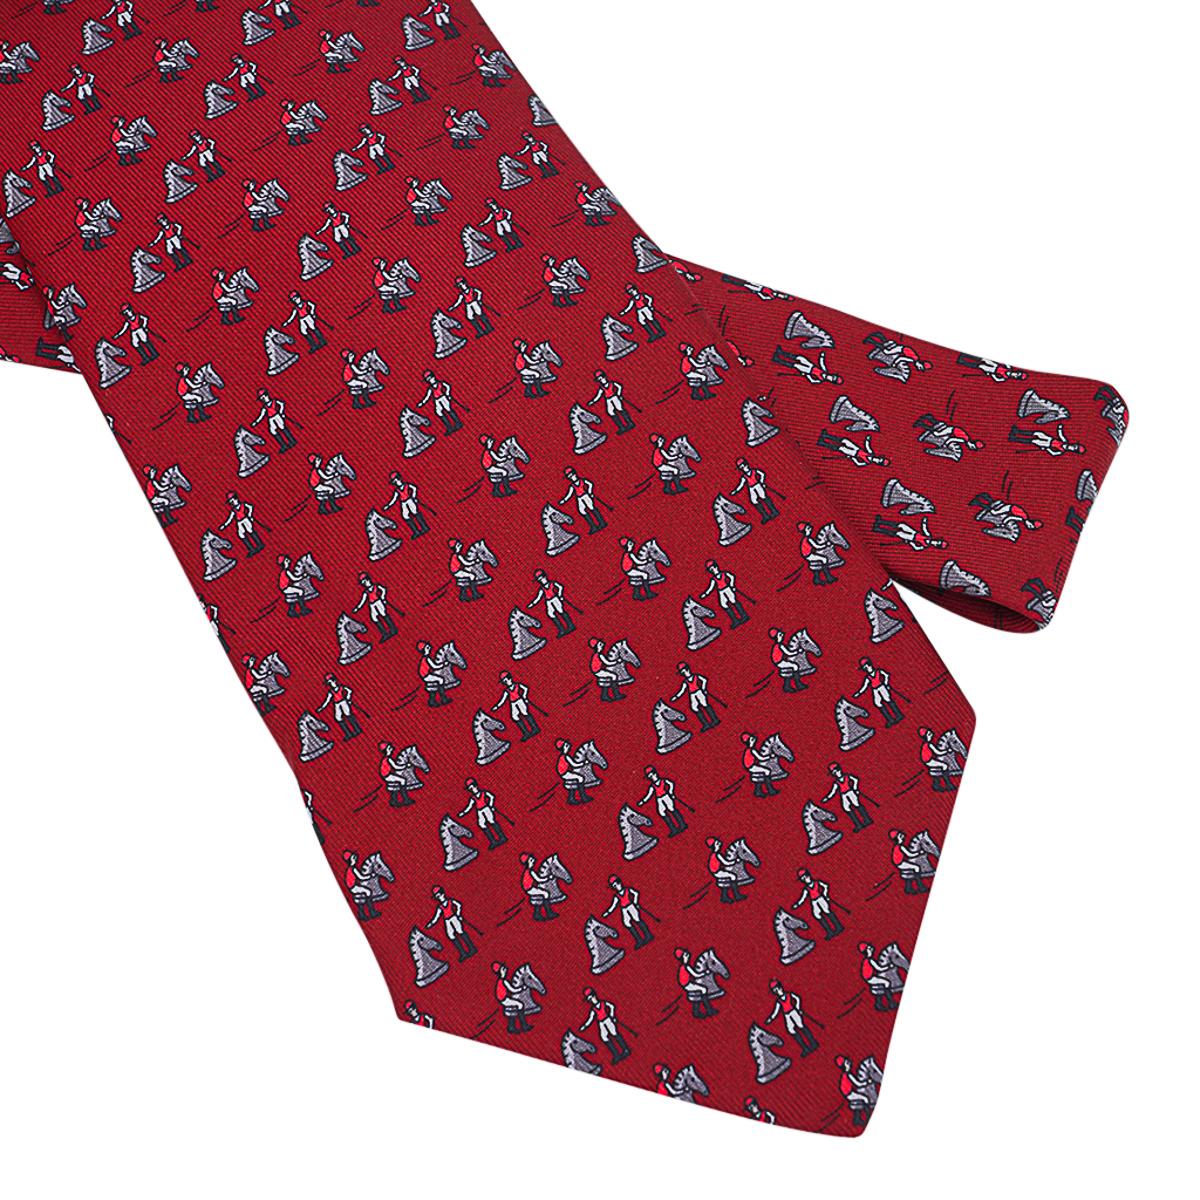 Mightychic offers an Hermes Echec Aux Jockey Twillbi silk tie featured in Carmin, Gris Fonce and Rouge colorway.
Charming depiction of the Jockey trying his hand at chess.
Designed by Philippe Mouquet.
Comes with signature Hermes tie sleeve.
NEW or